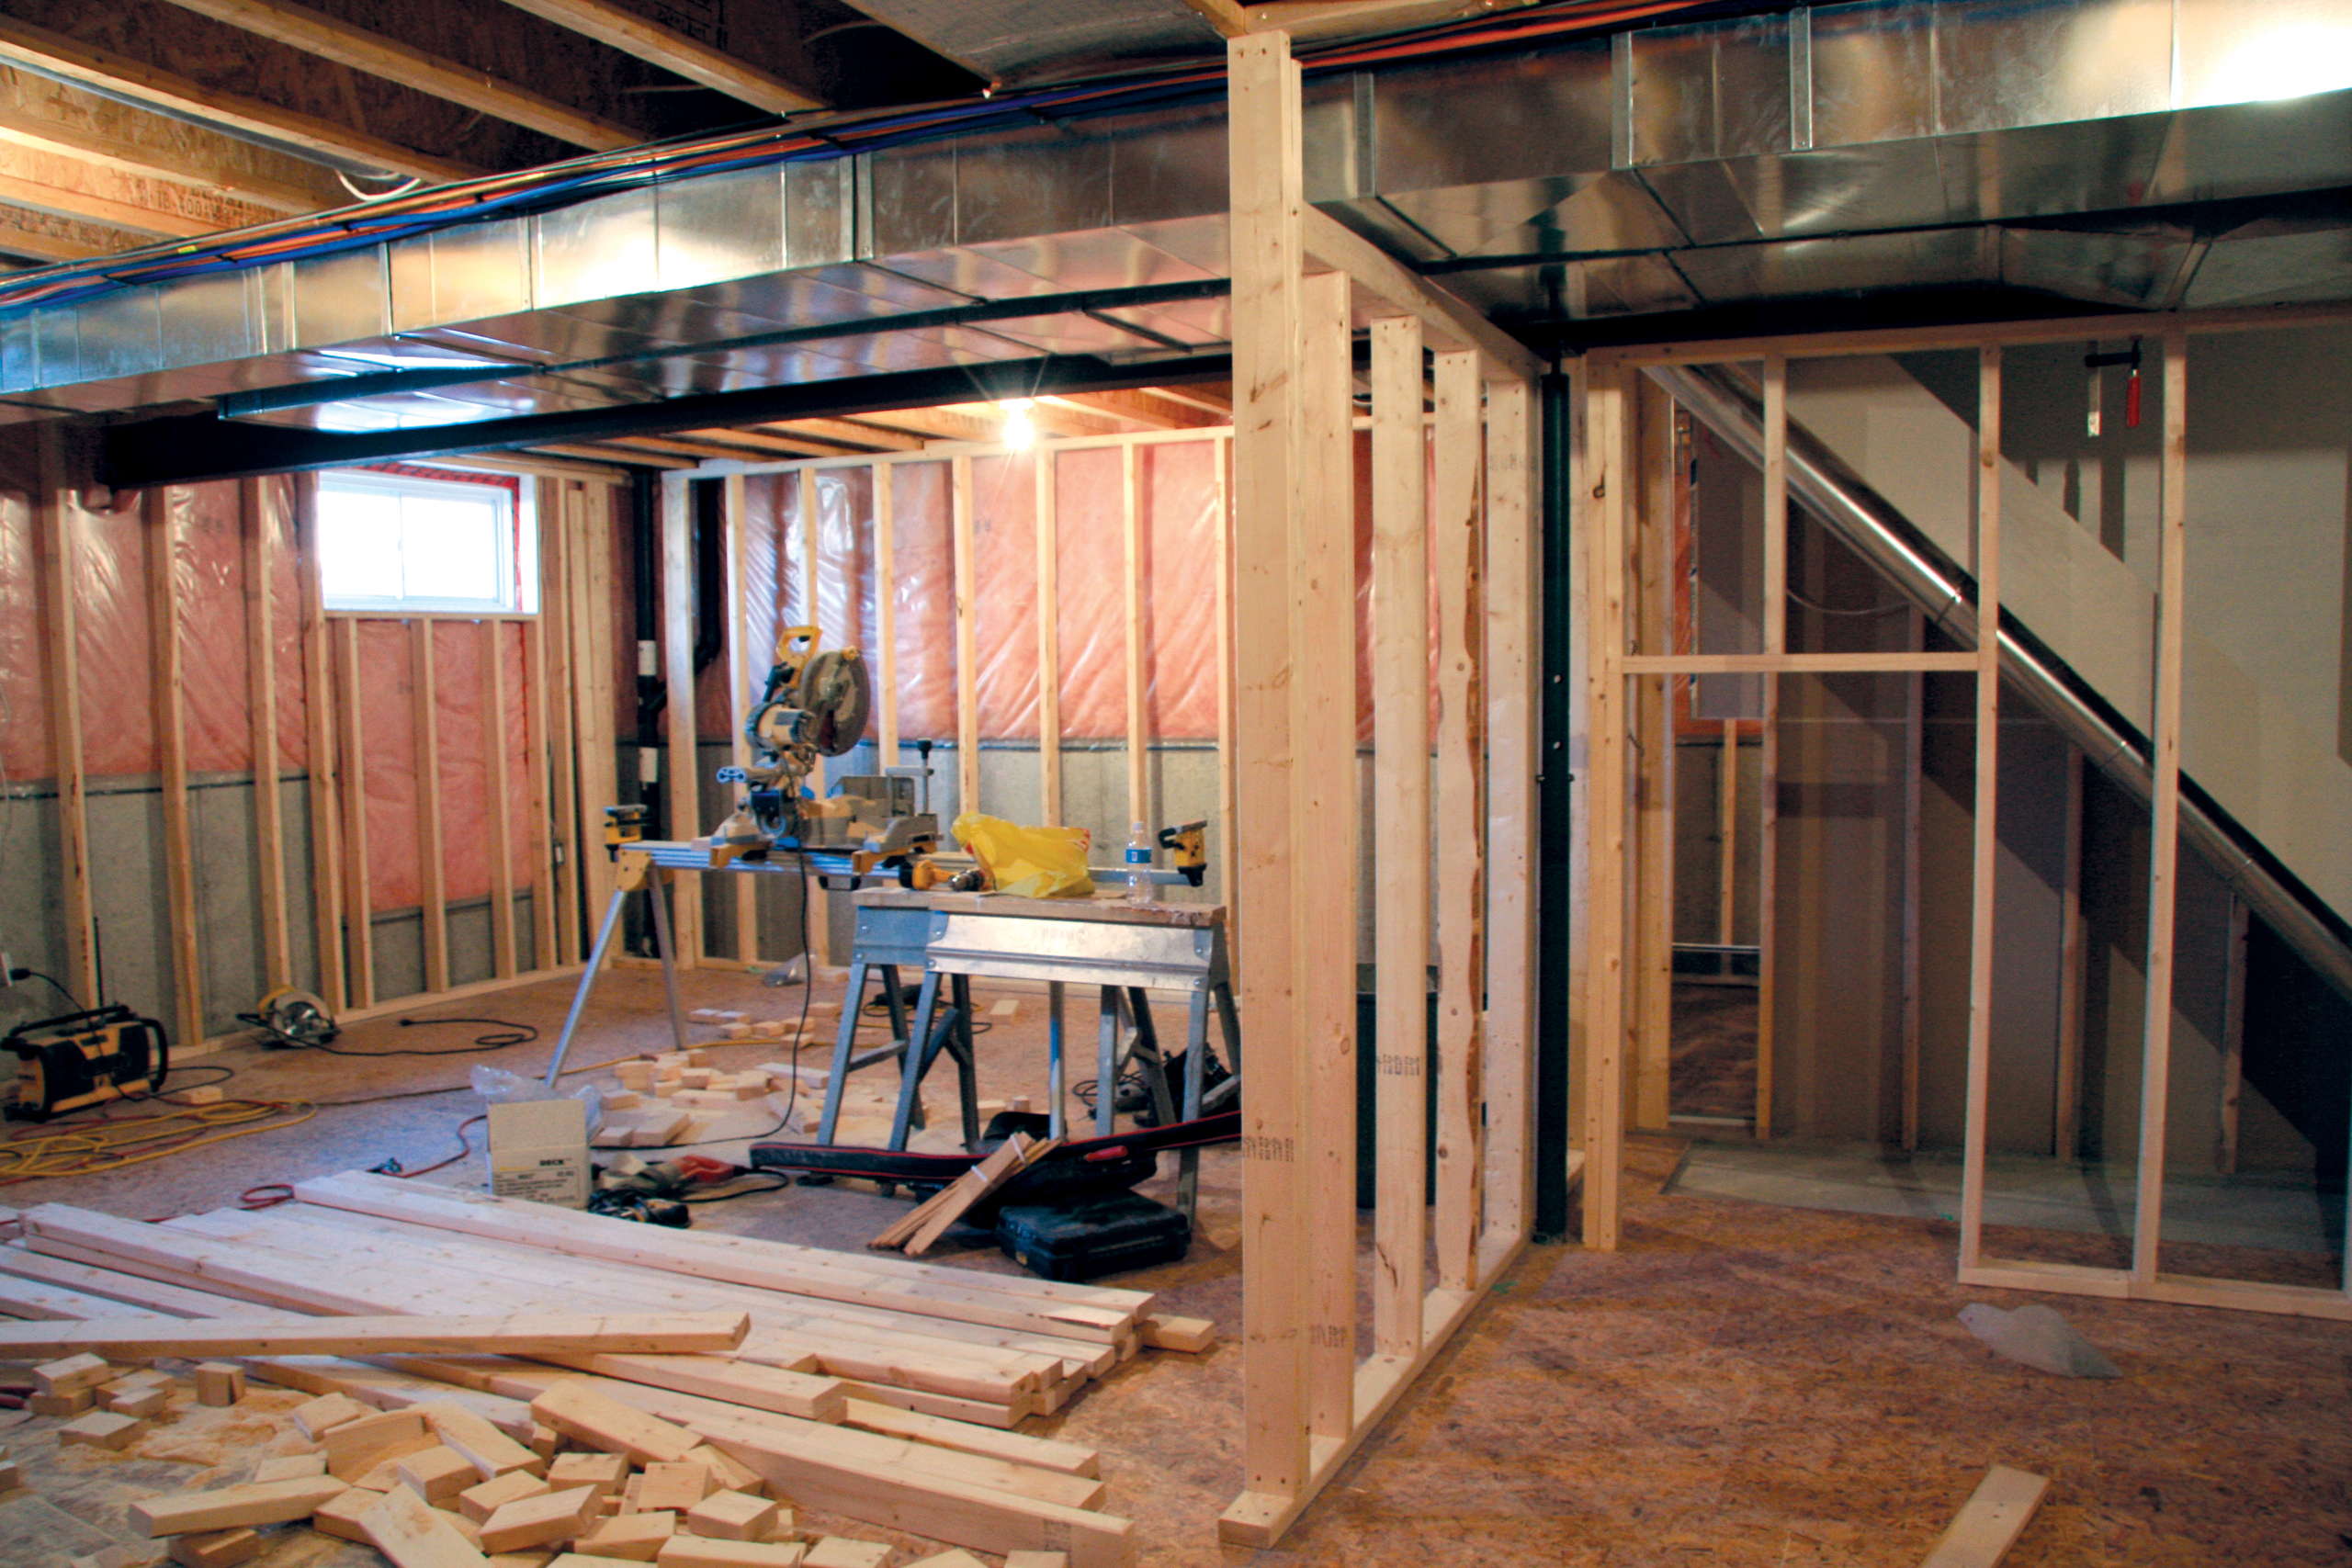 http://americanexpress-construction.com/wp-content/uploads/2015/04/roomaddition2.jpg